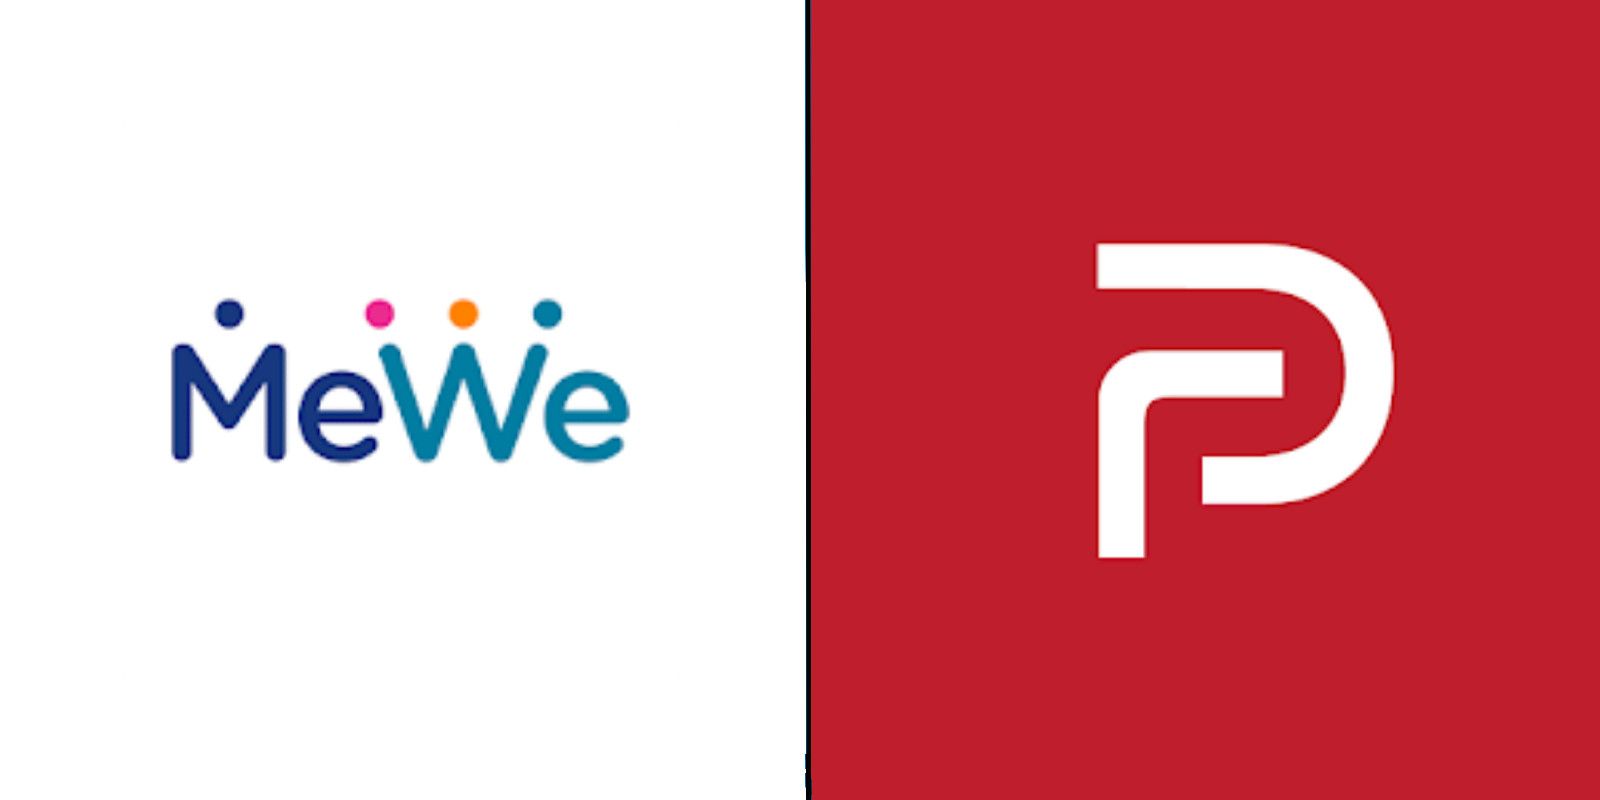 The MeWe and Parler logos